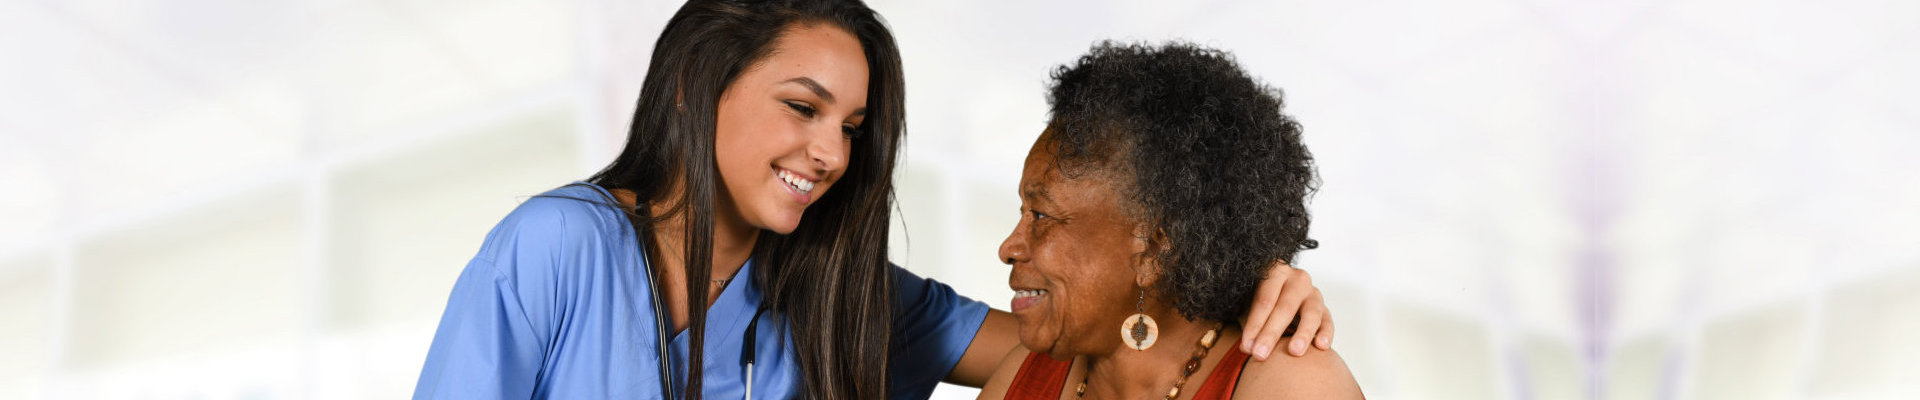 elder woman with lady caregiver smiling at each other